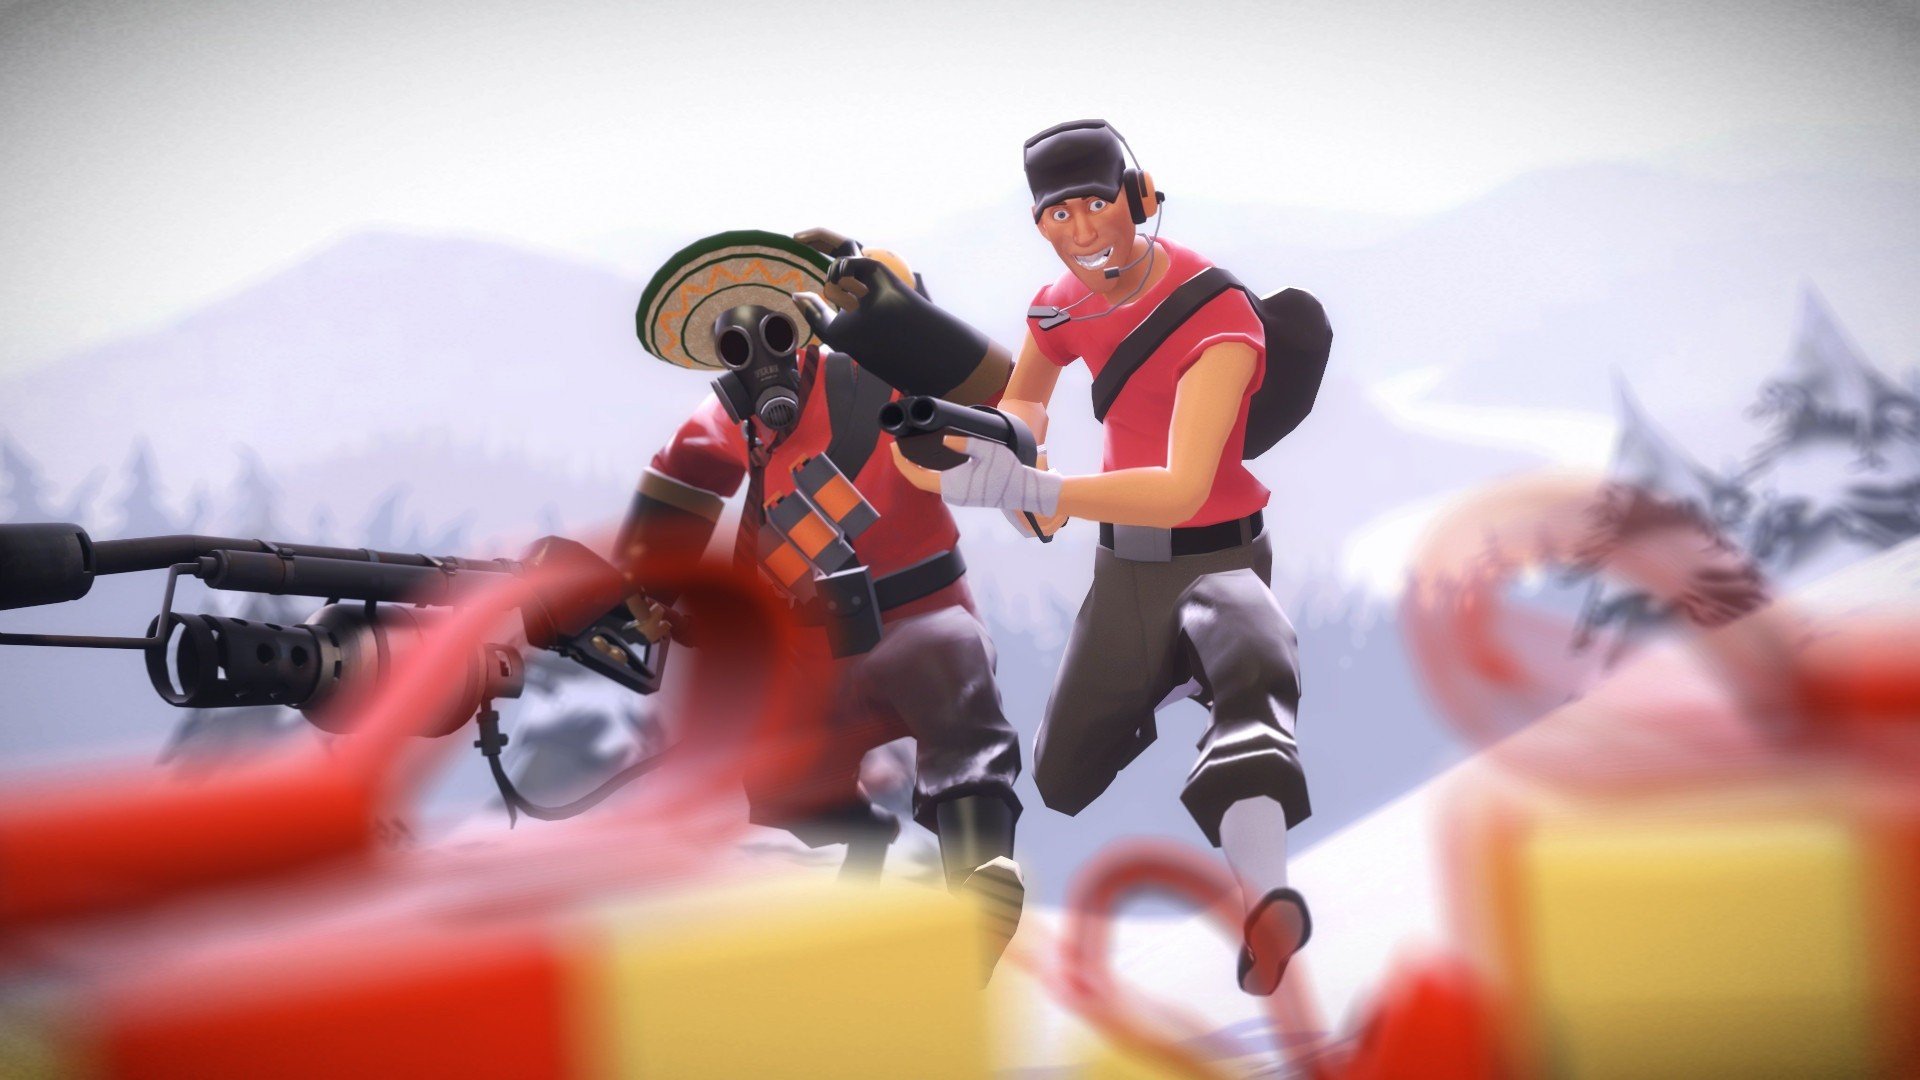 Pyro (character), Scout (character), Video games, Team Fortress 2 Wallpaper